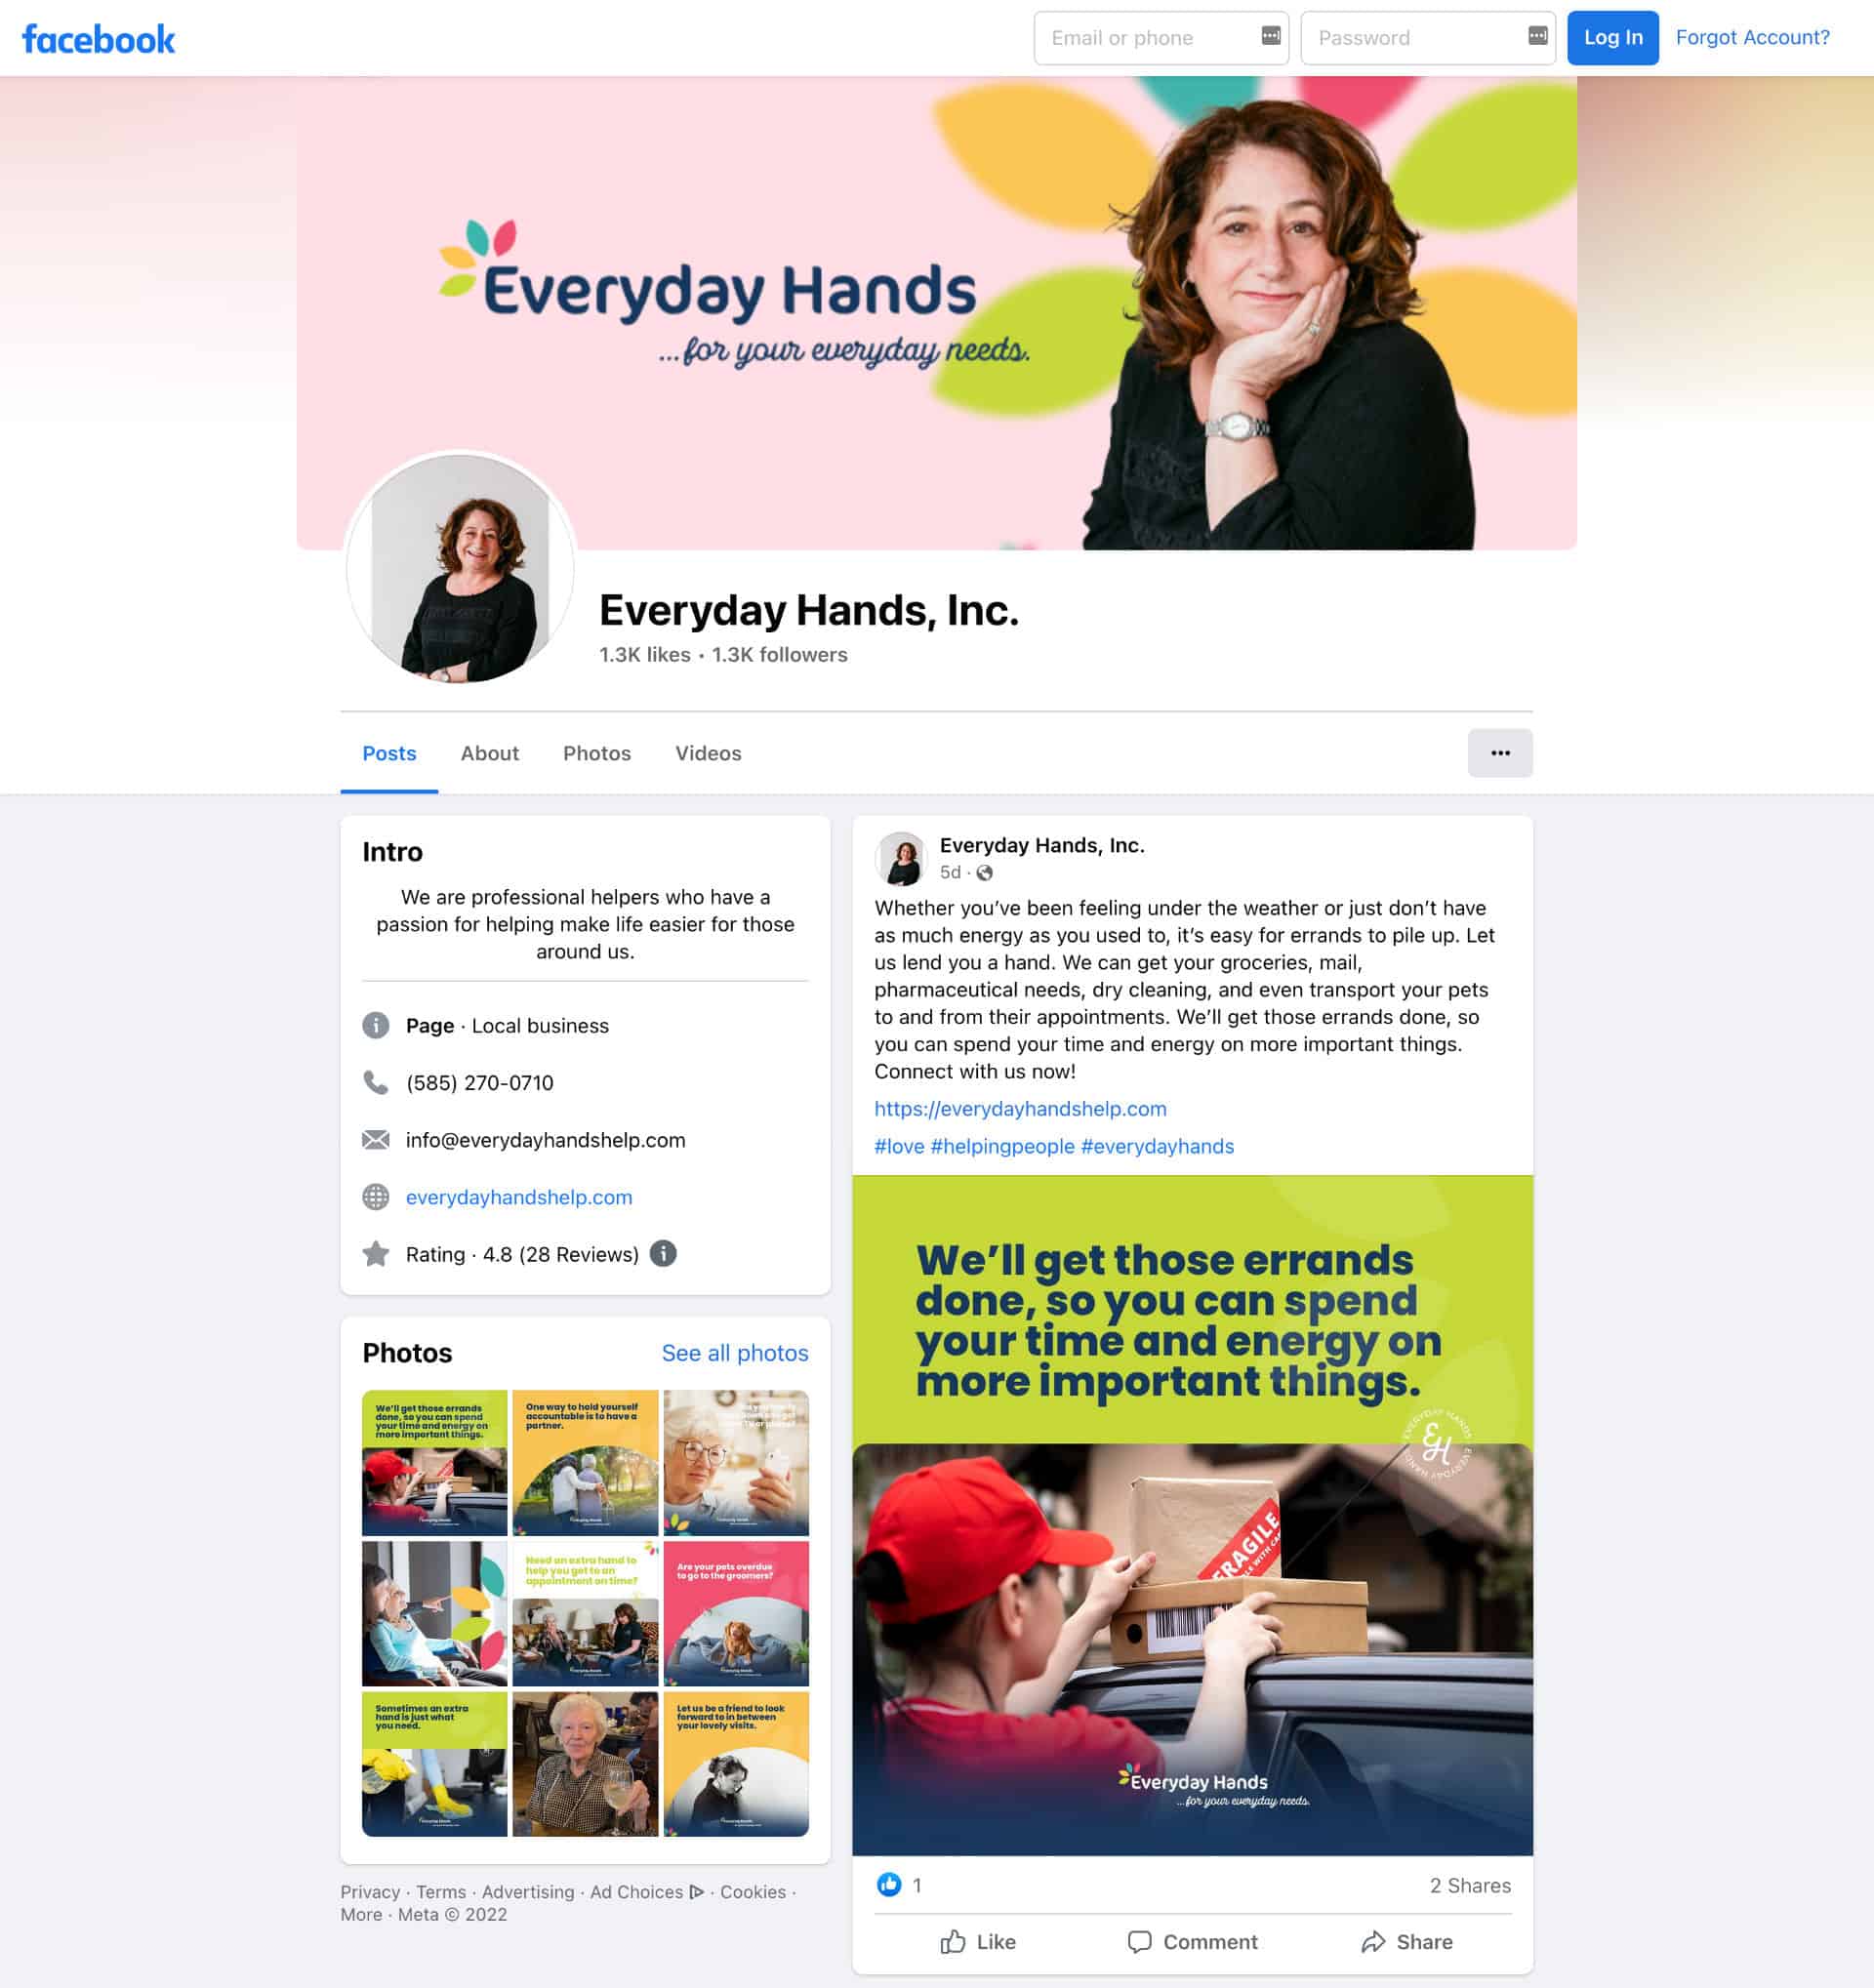 Everyday Hands Facebook Page